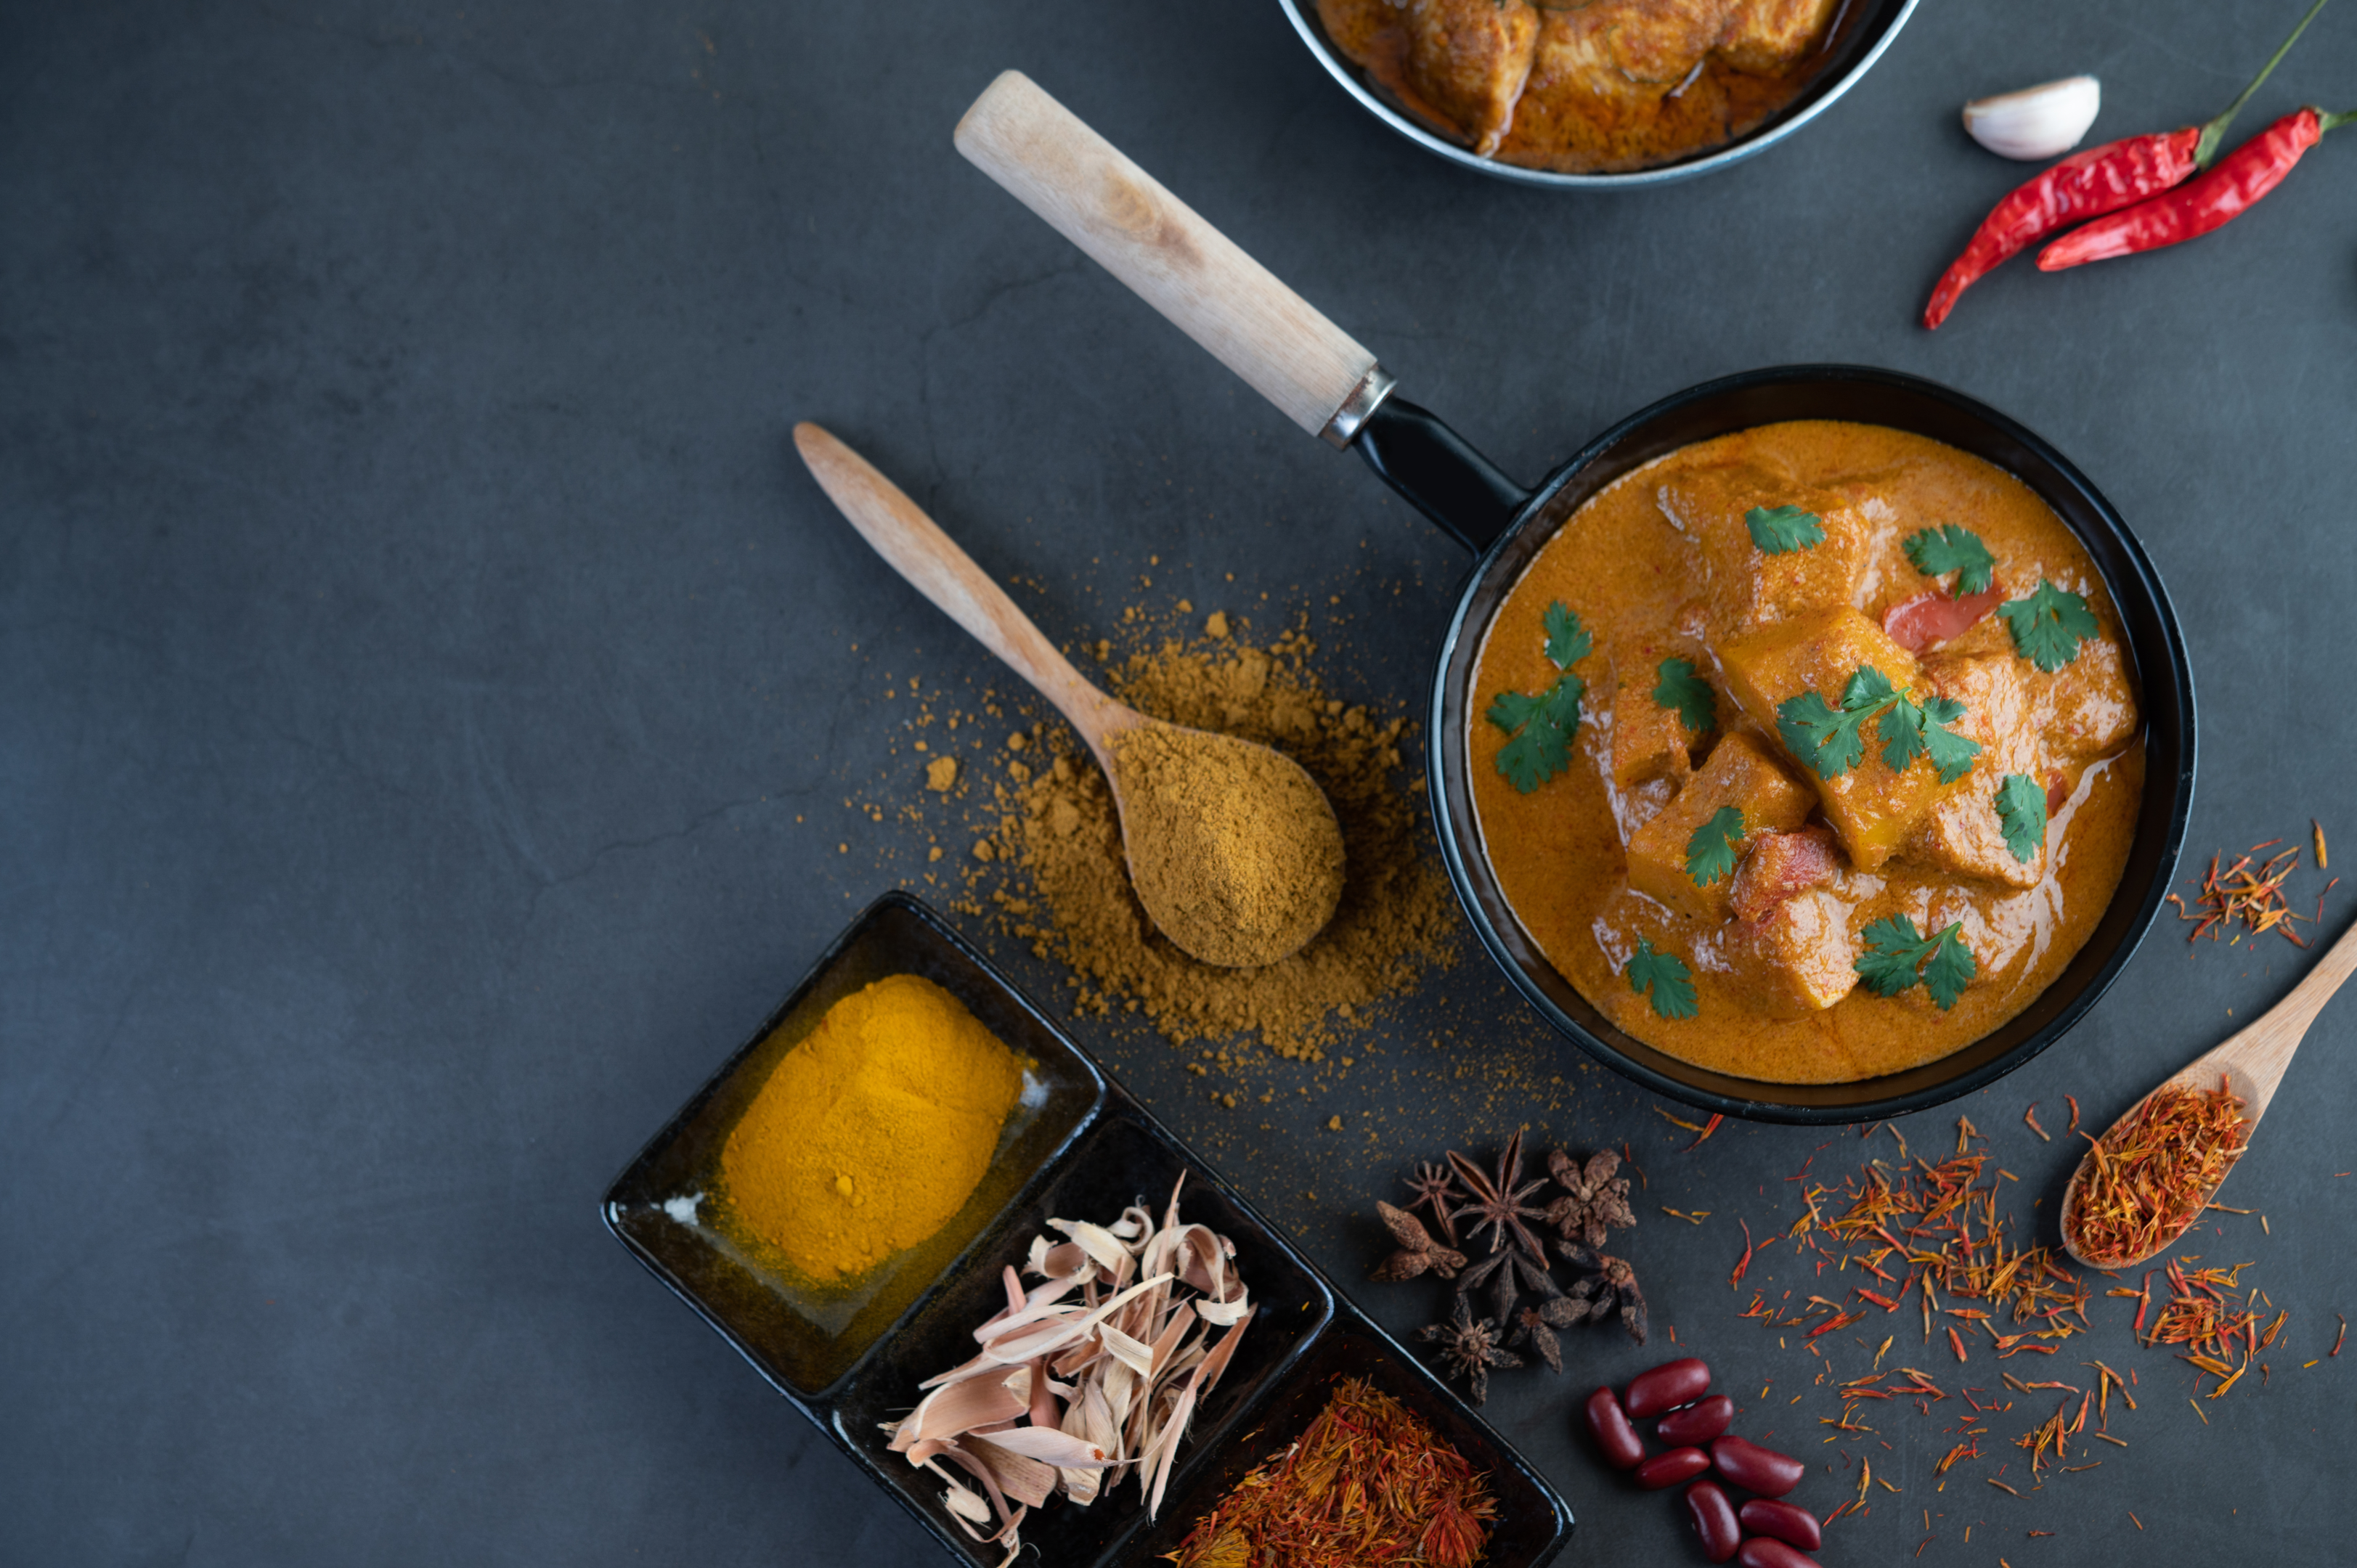 You can't go wrong with the classic creamy tones of a mild korma curry for a nutritous family meal.